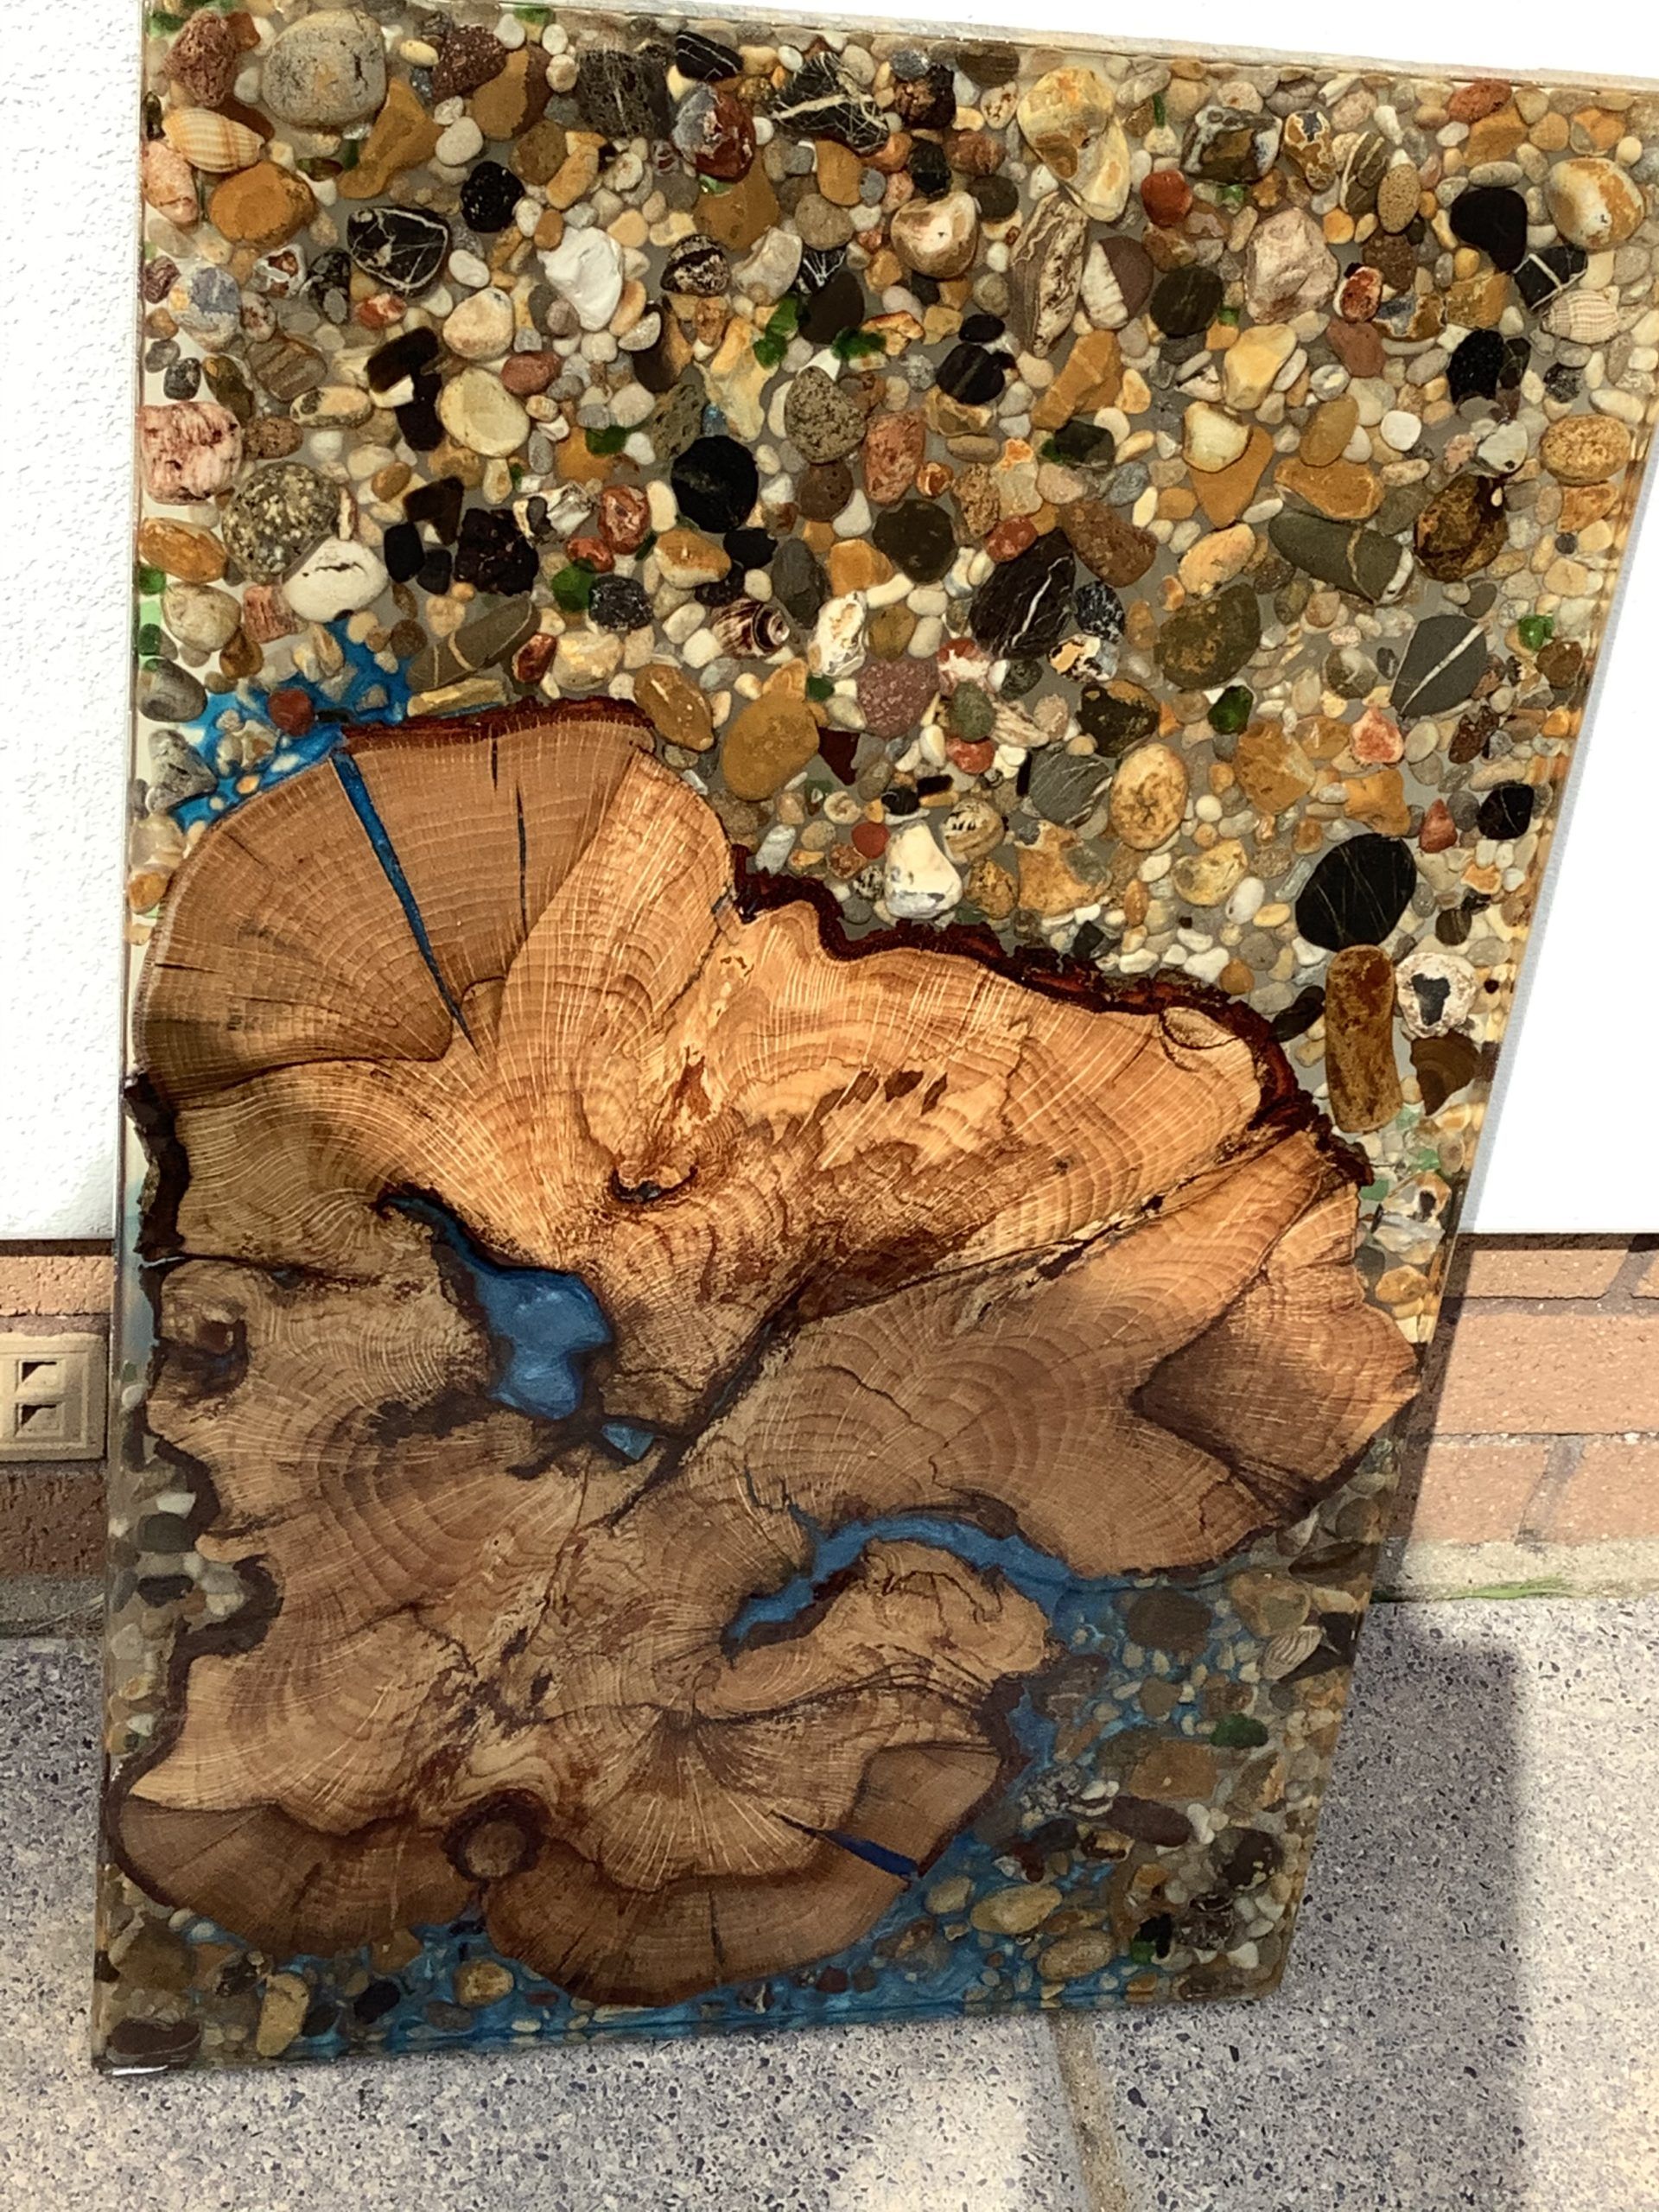 Oak Wood, Blue Resin With Sea Pebbles And Shells Set In Intended For Newest Oak Wood Wall Art (View 11 of 20)